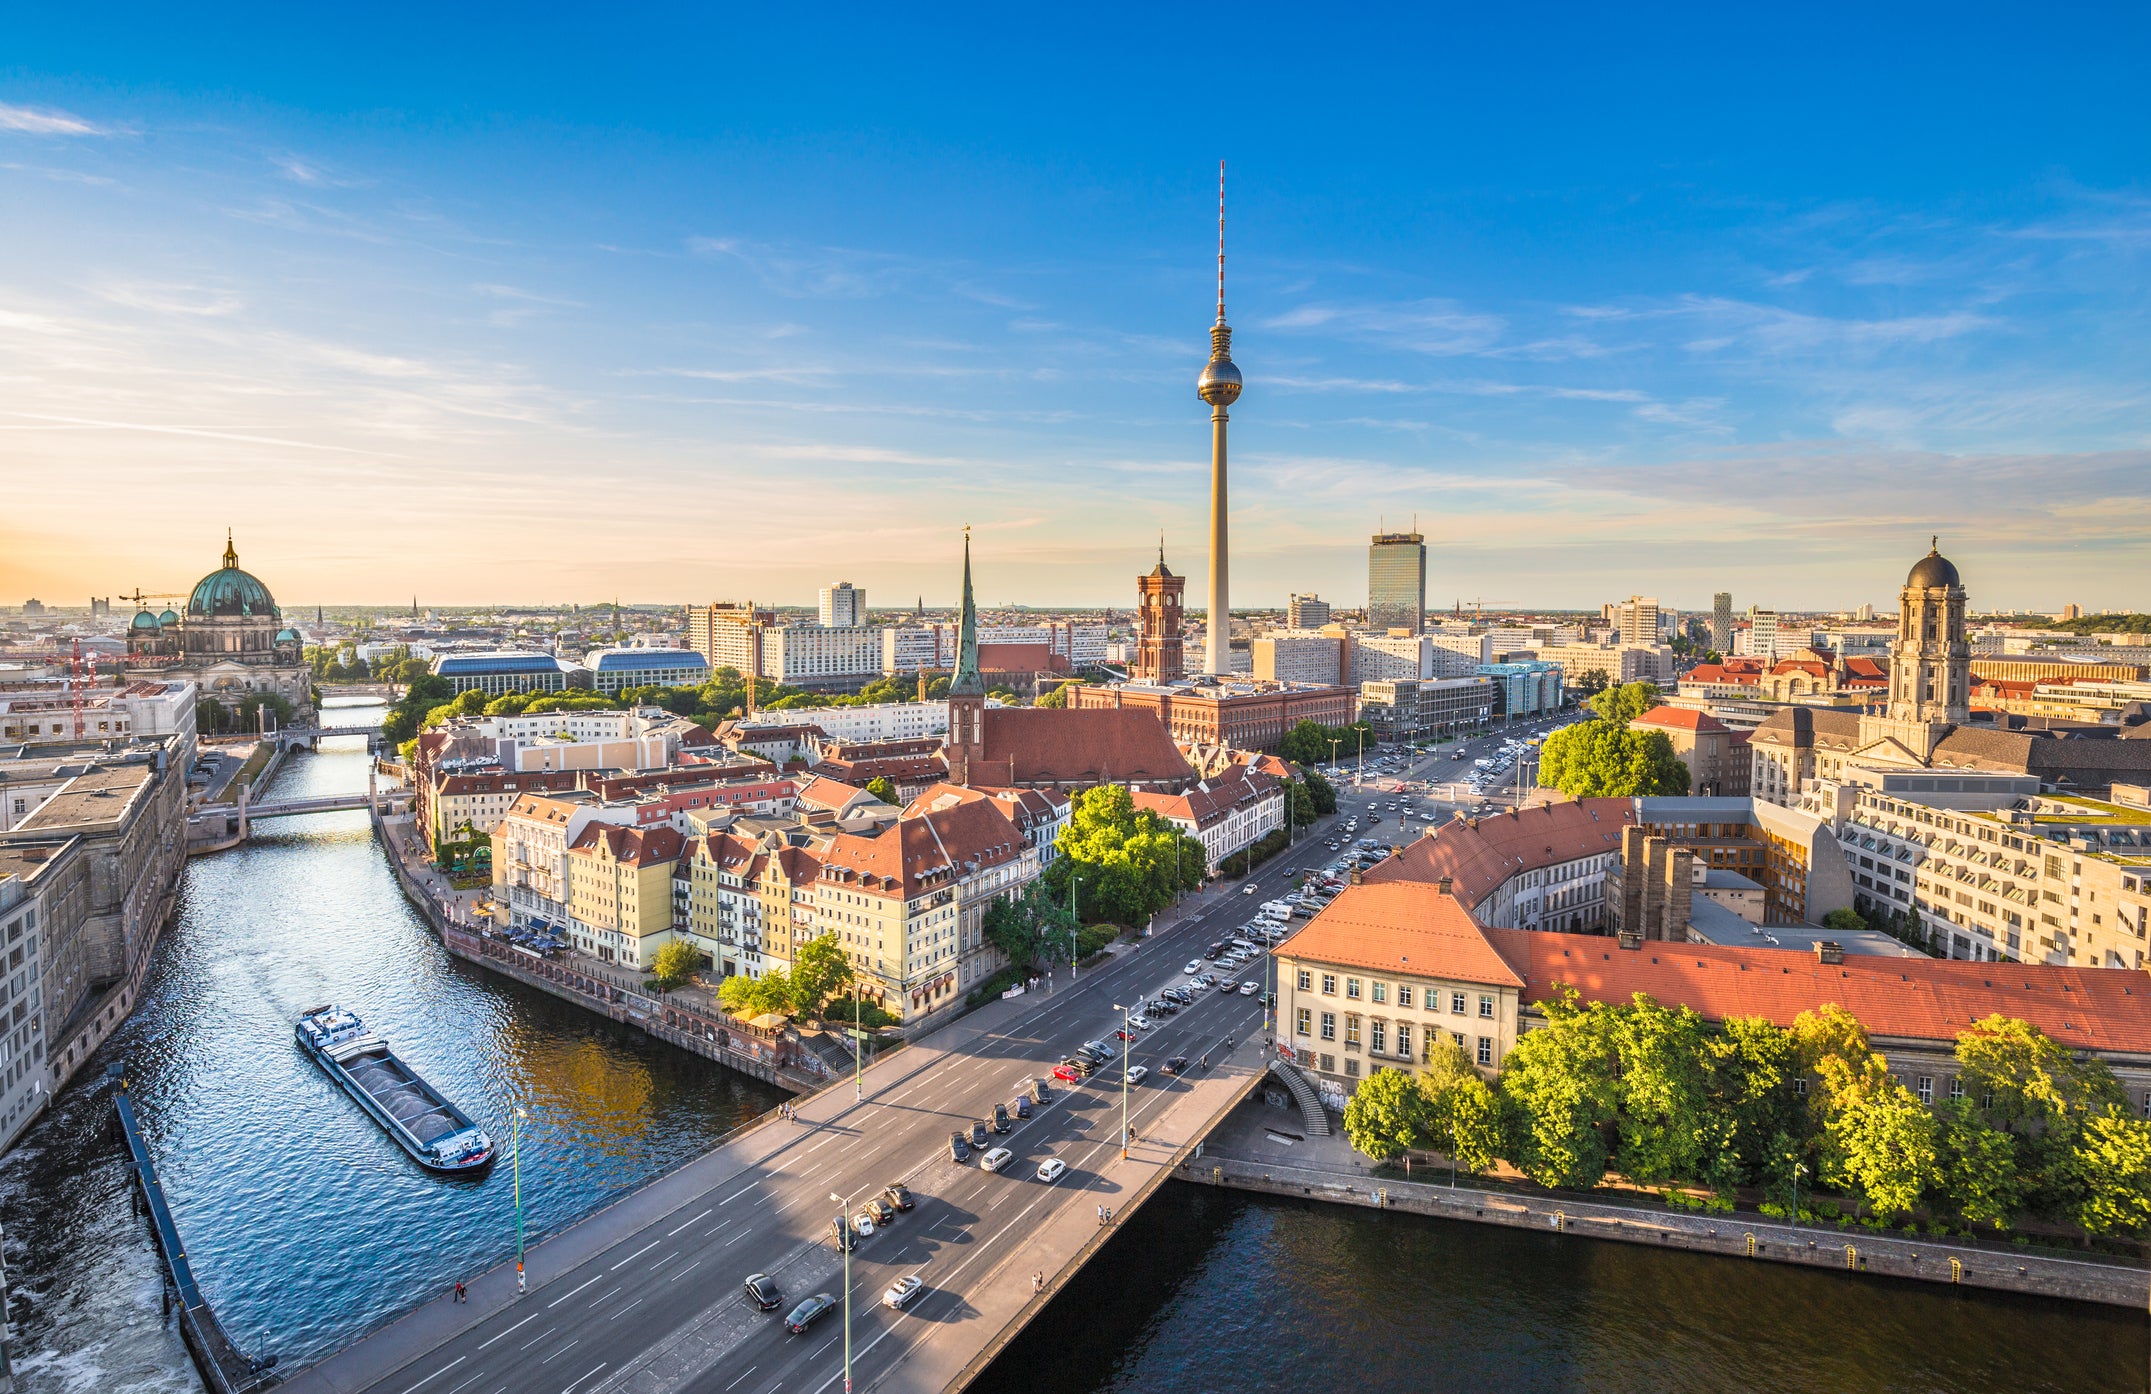 Berlin, the buzzy capital of Germany, which four in five Brits couldn't point to on a map